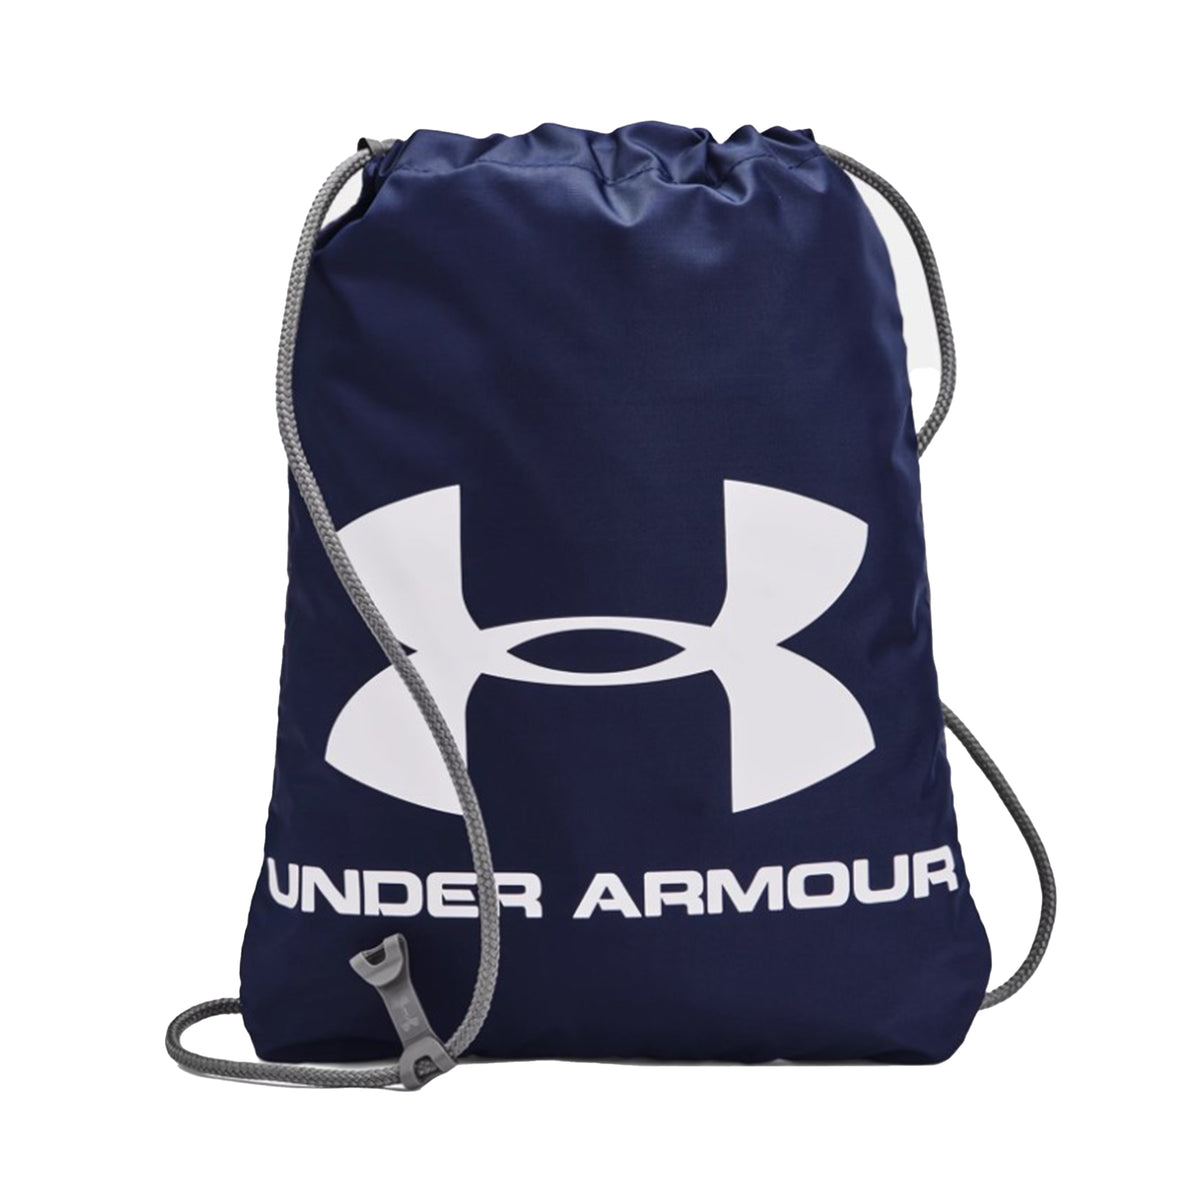 Under Armour Ozsee Sackpack: Blue